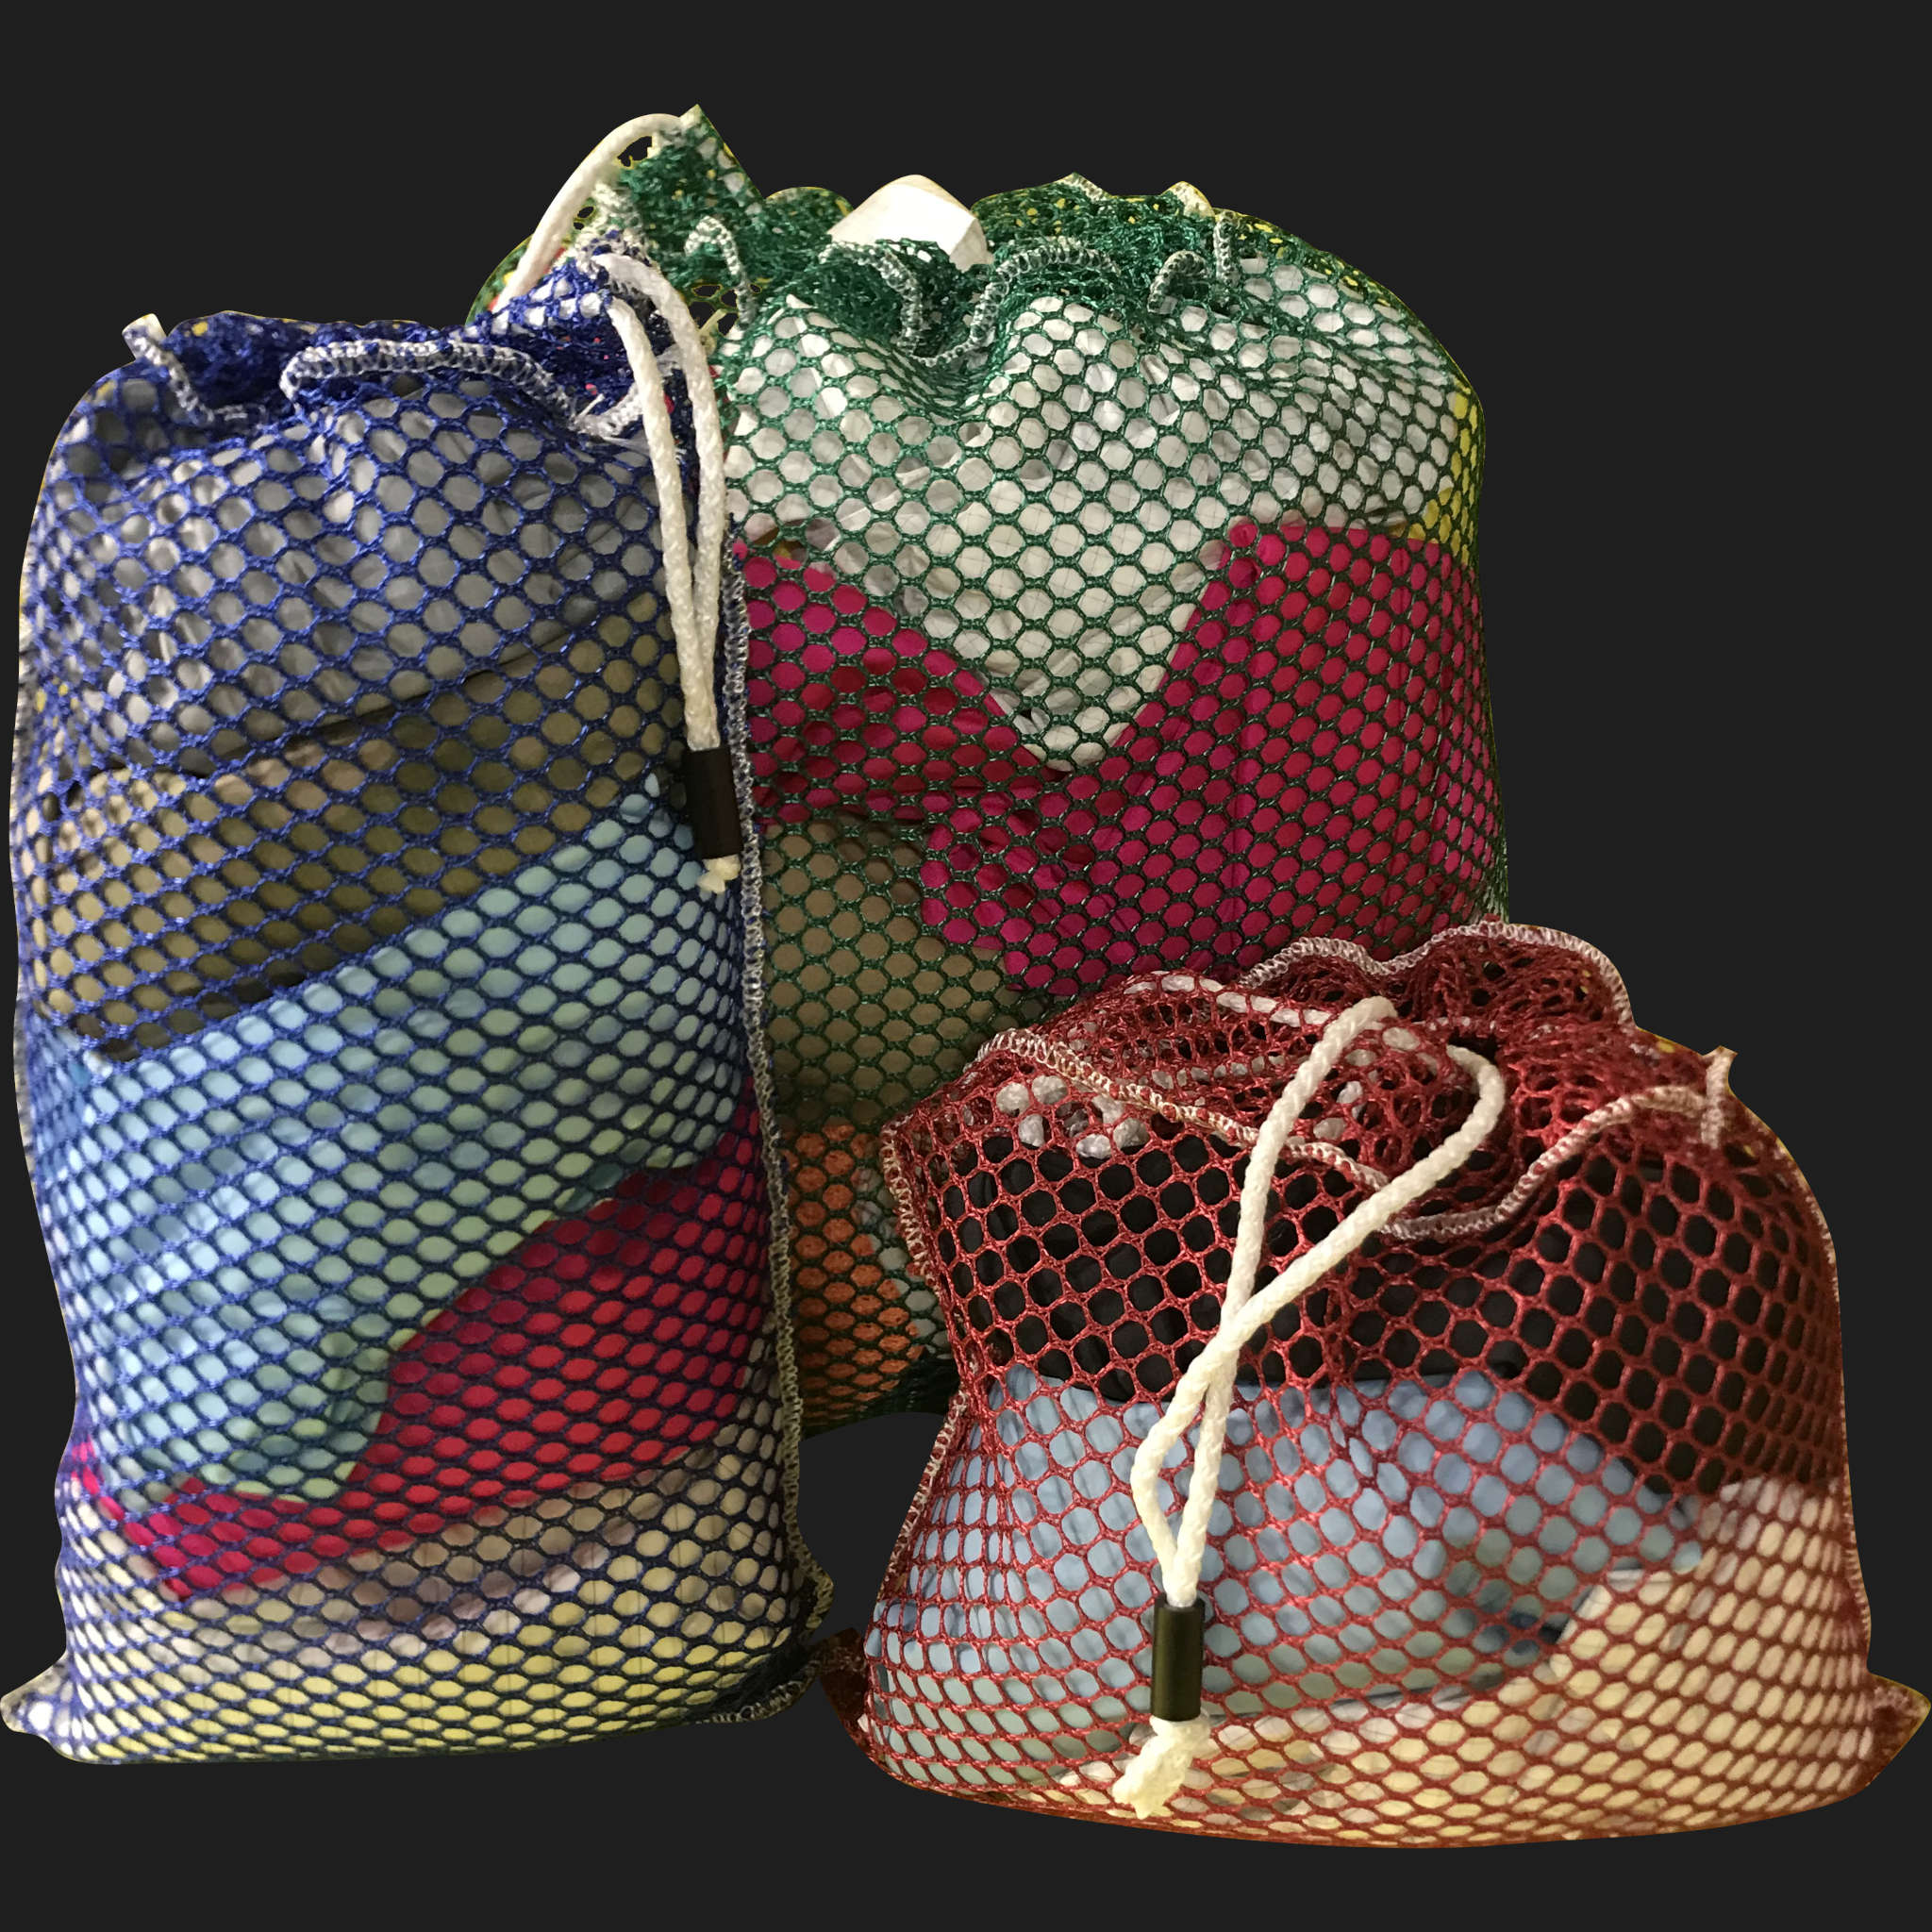 40" x 62" Customized Mesh-Net-Laundry Bags Heavy Duty with Cord and barrellock closure